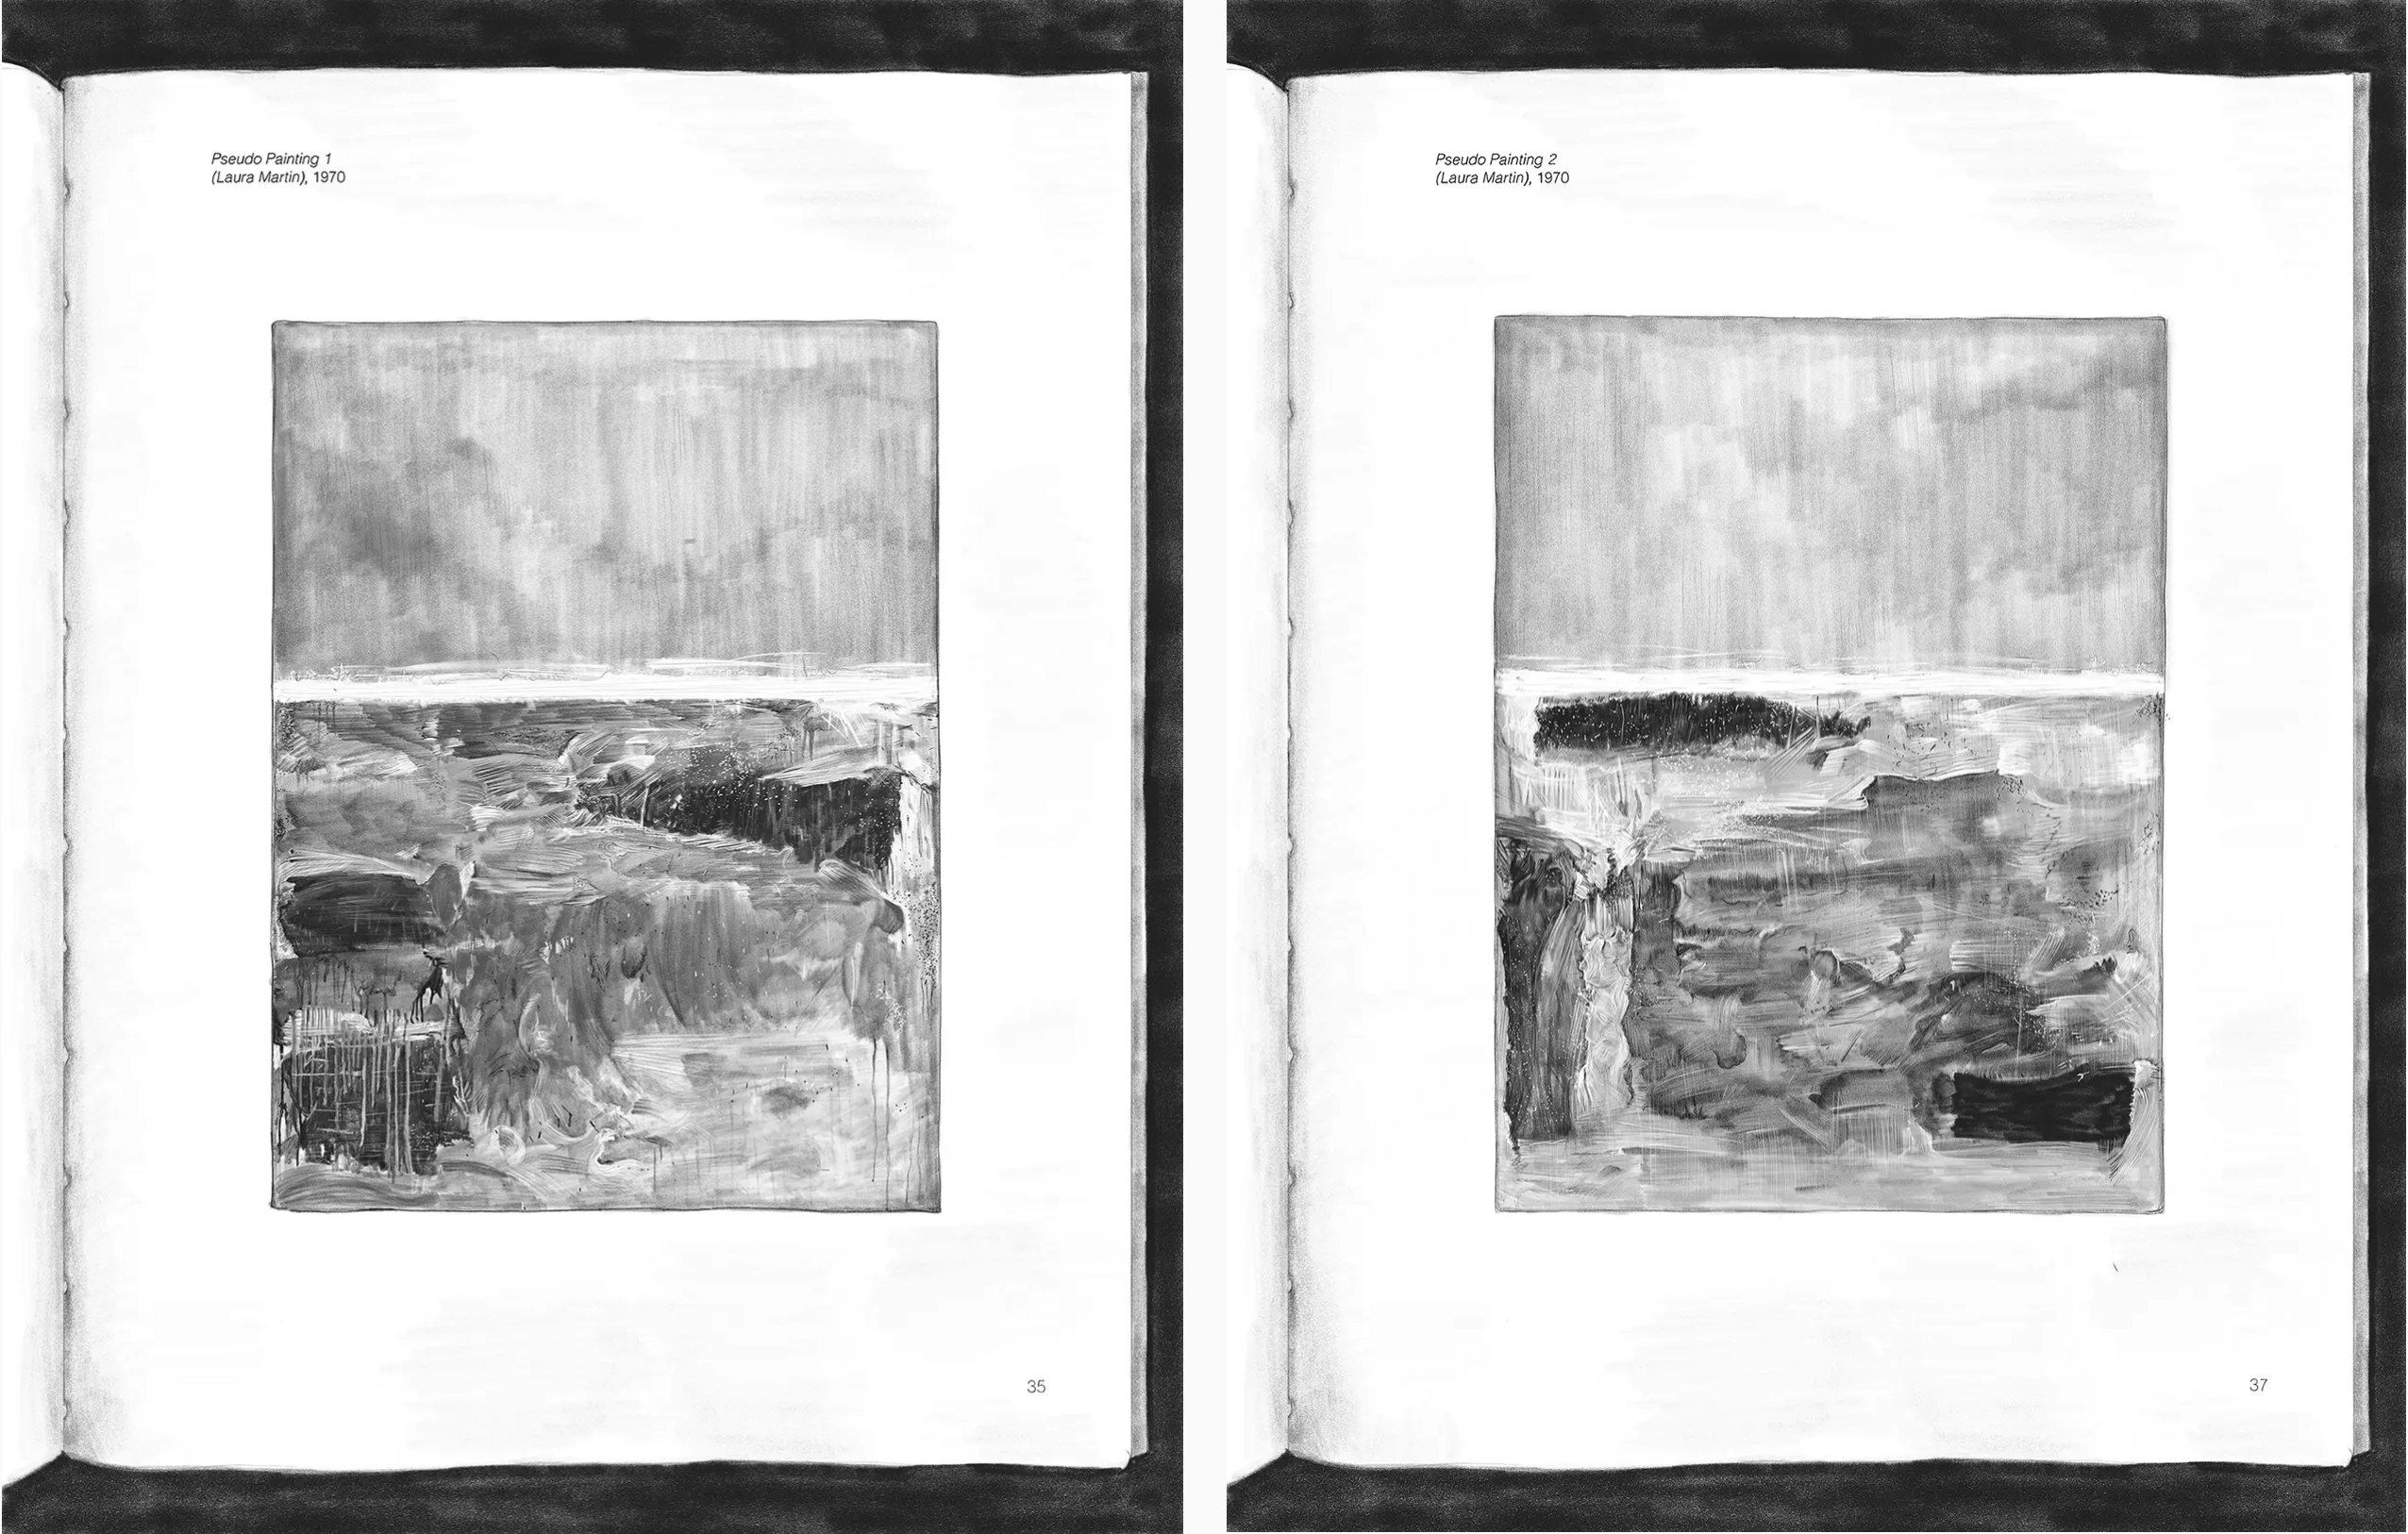 Two watercolour paintings of pages in a book, containing their own paintings of murky landscapes, which are credited to Laura Martin.